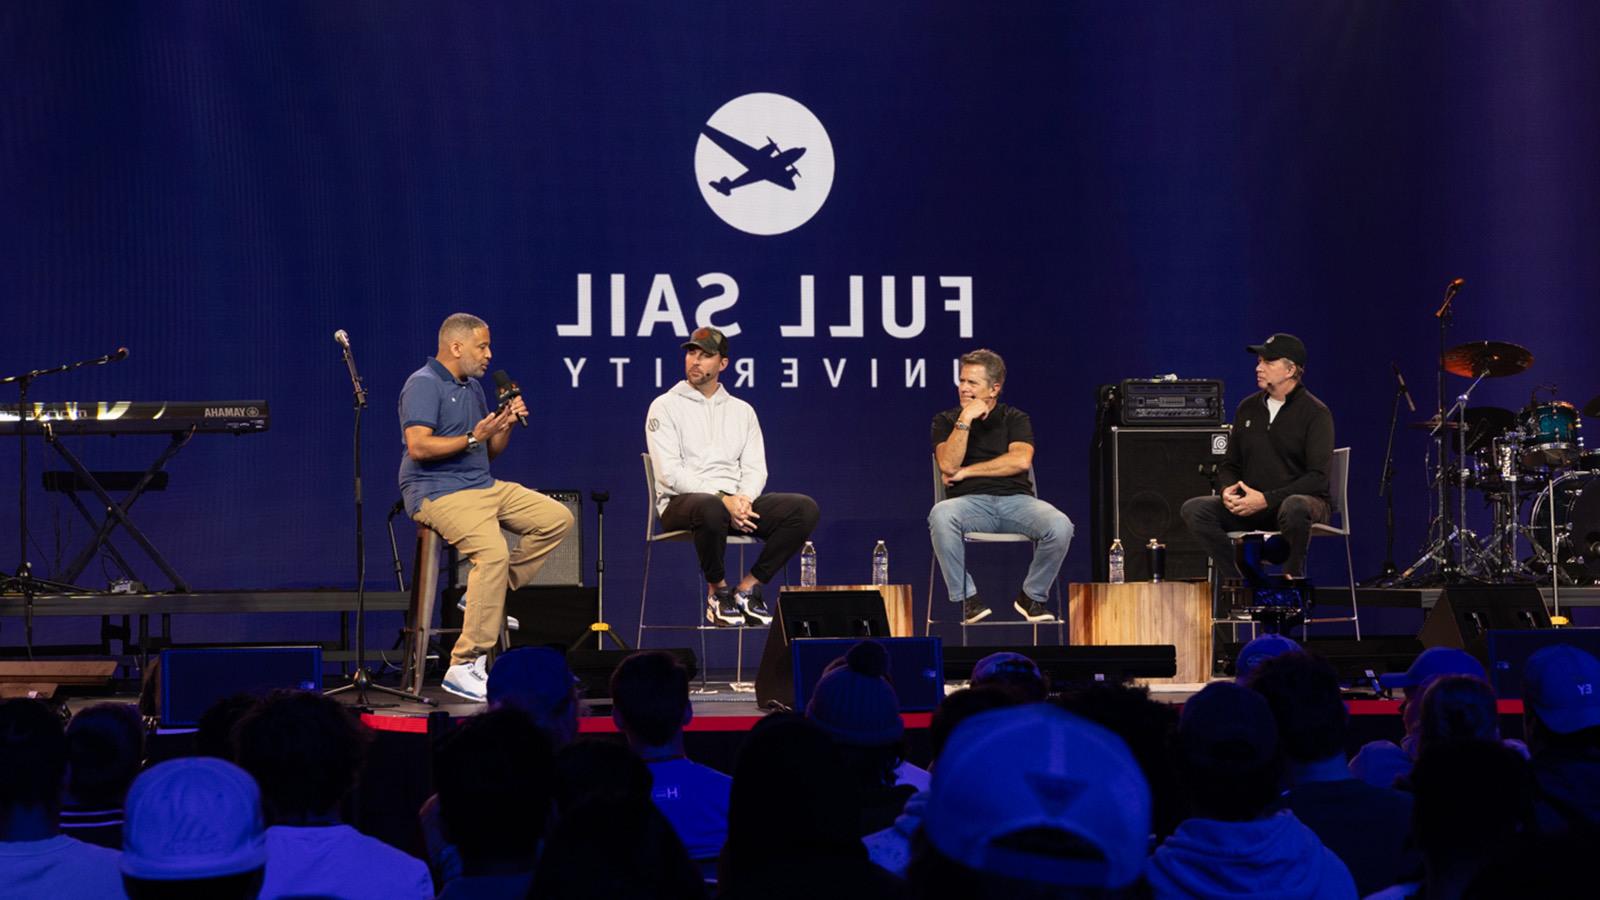 MLB Pitcher Adam Wainwright and three other people are seated on a stage during a panel, the large-scale LED screen behind them reads “满帆大学” against a blue backdrop.